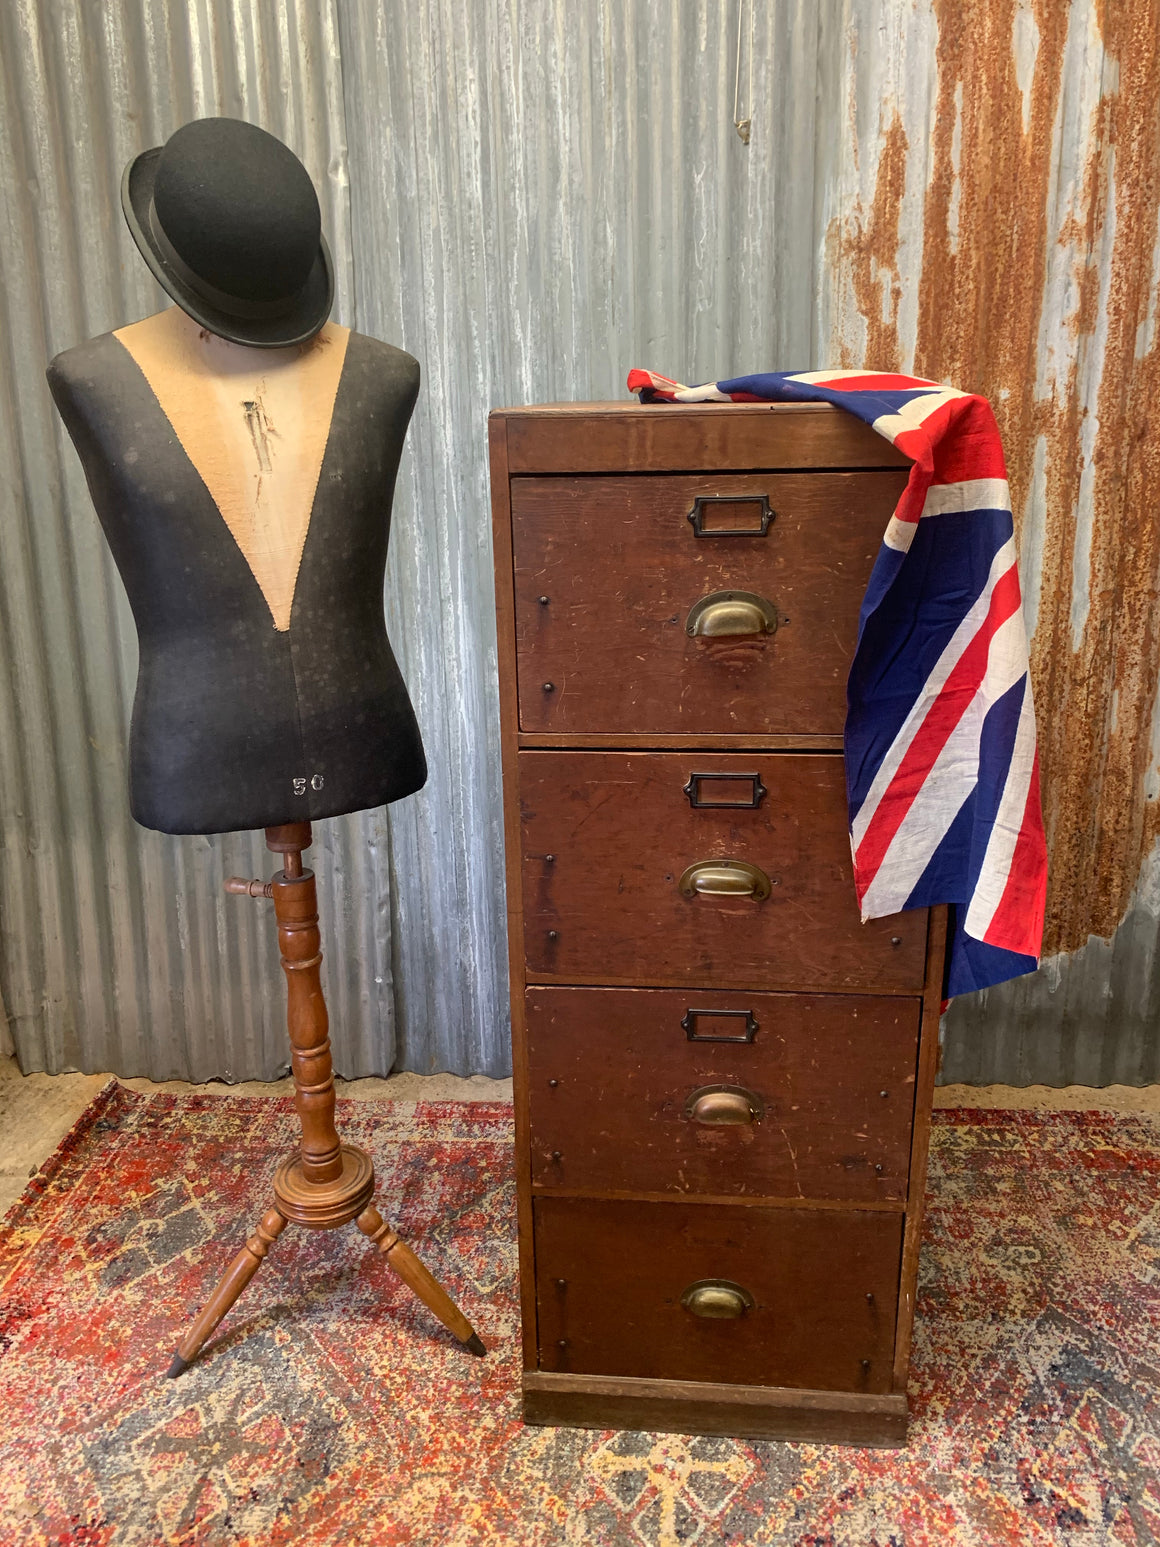 A WWII era wooden filing cabinet